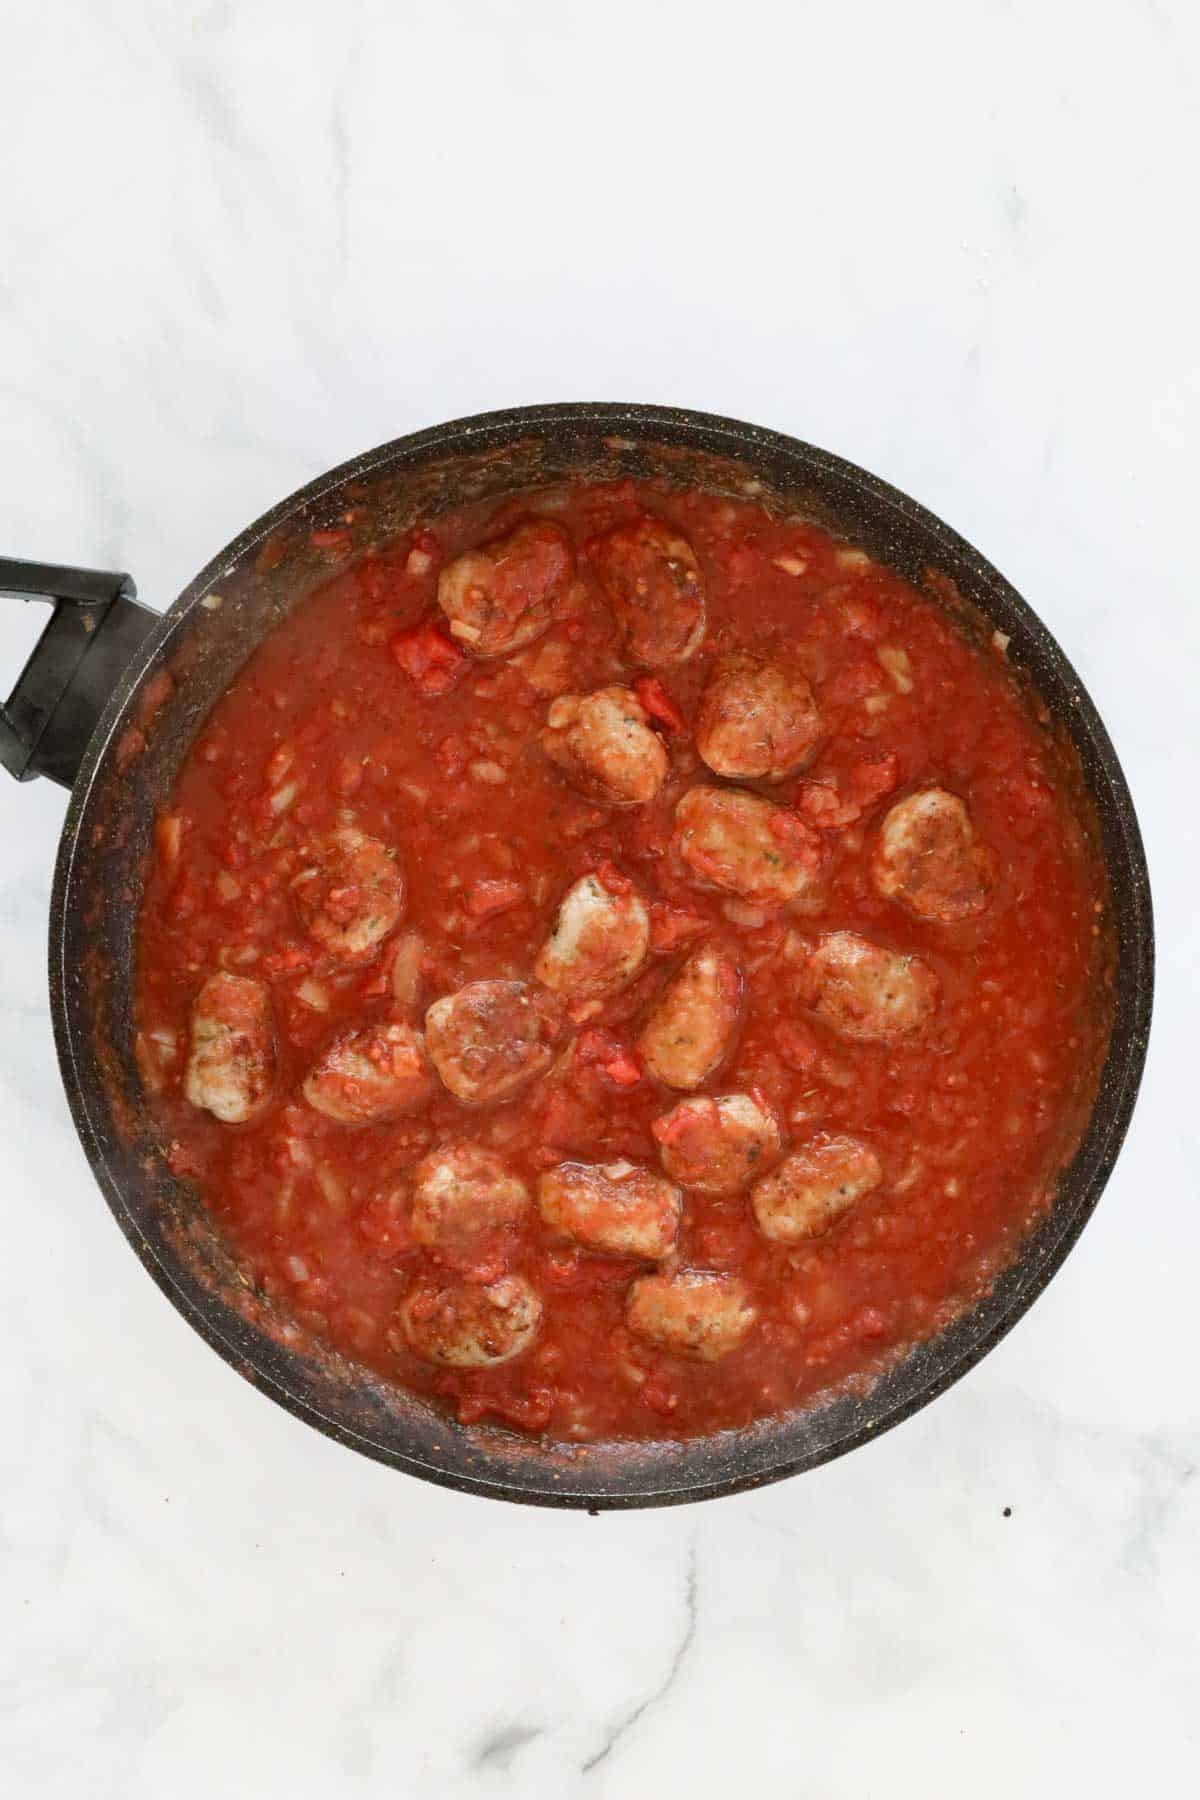 Meatballs returned to the pan filled with tomato sauce.